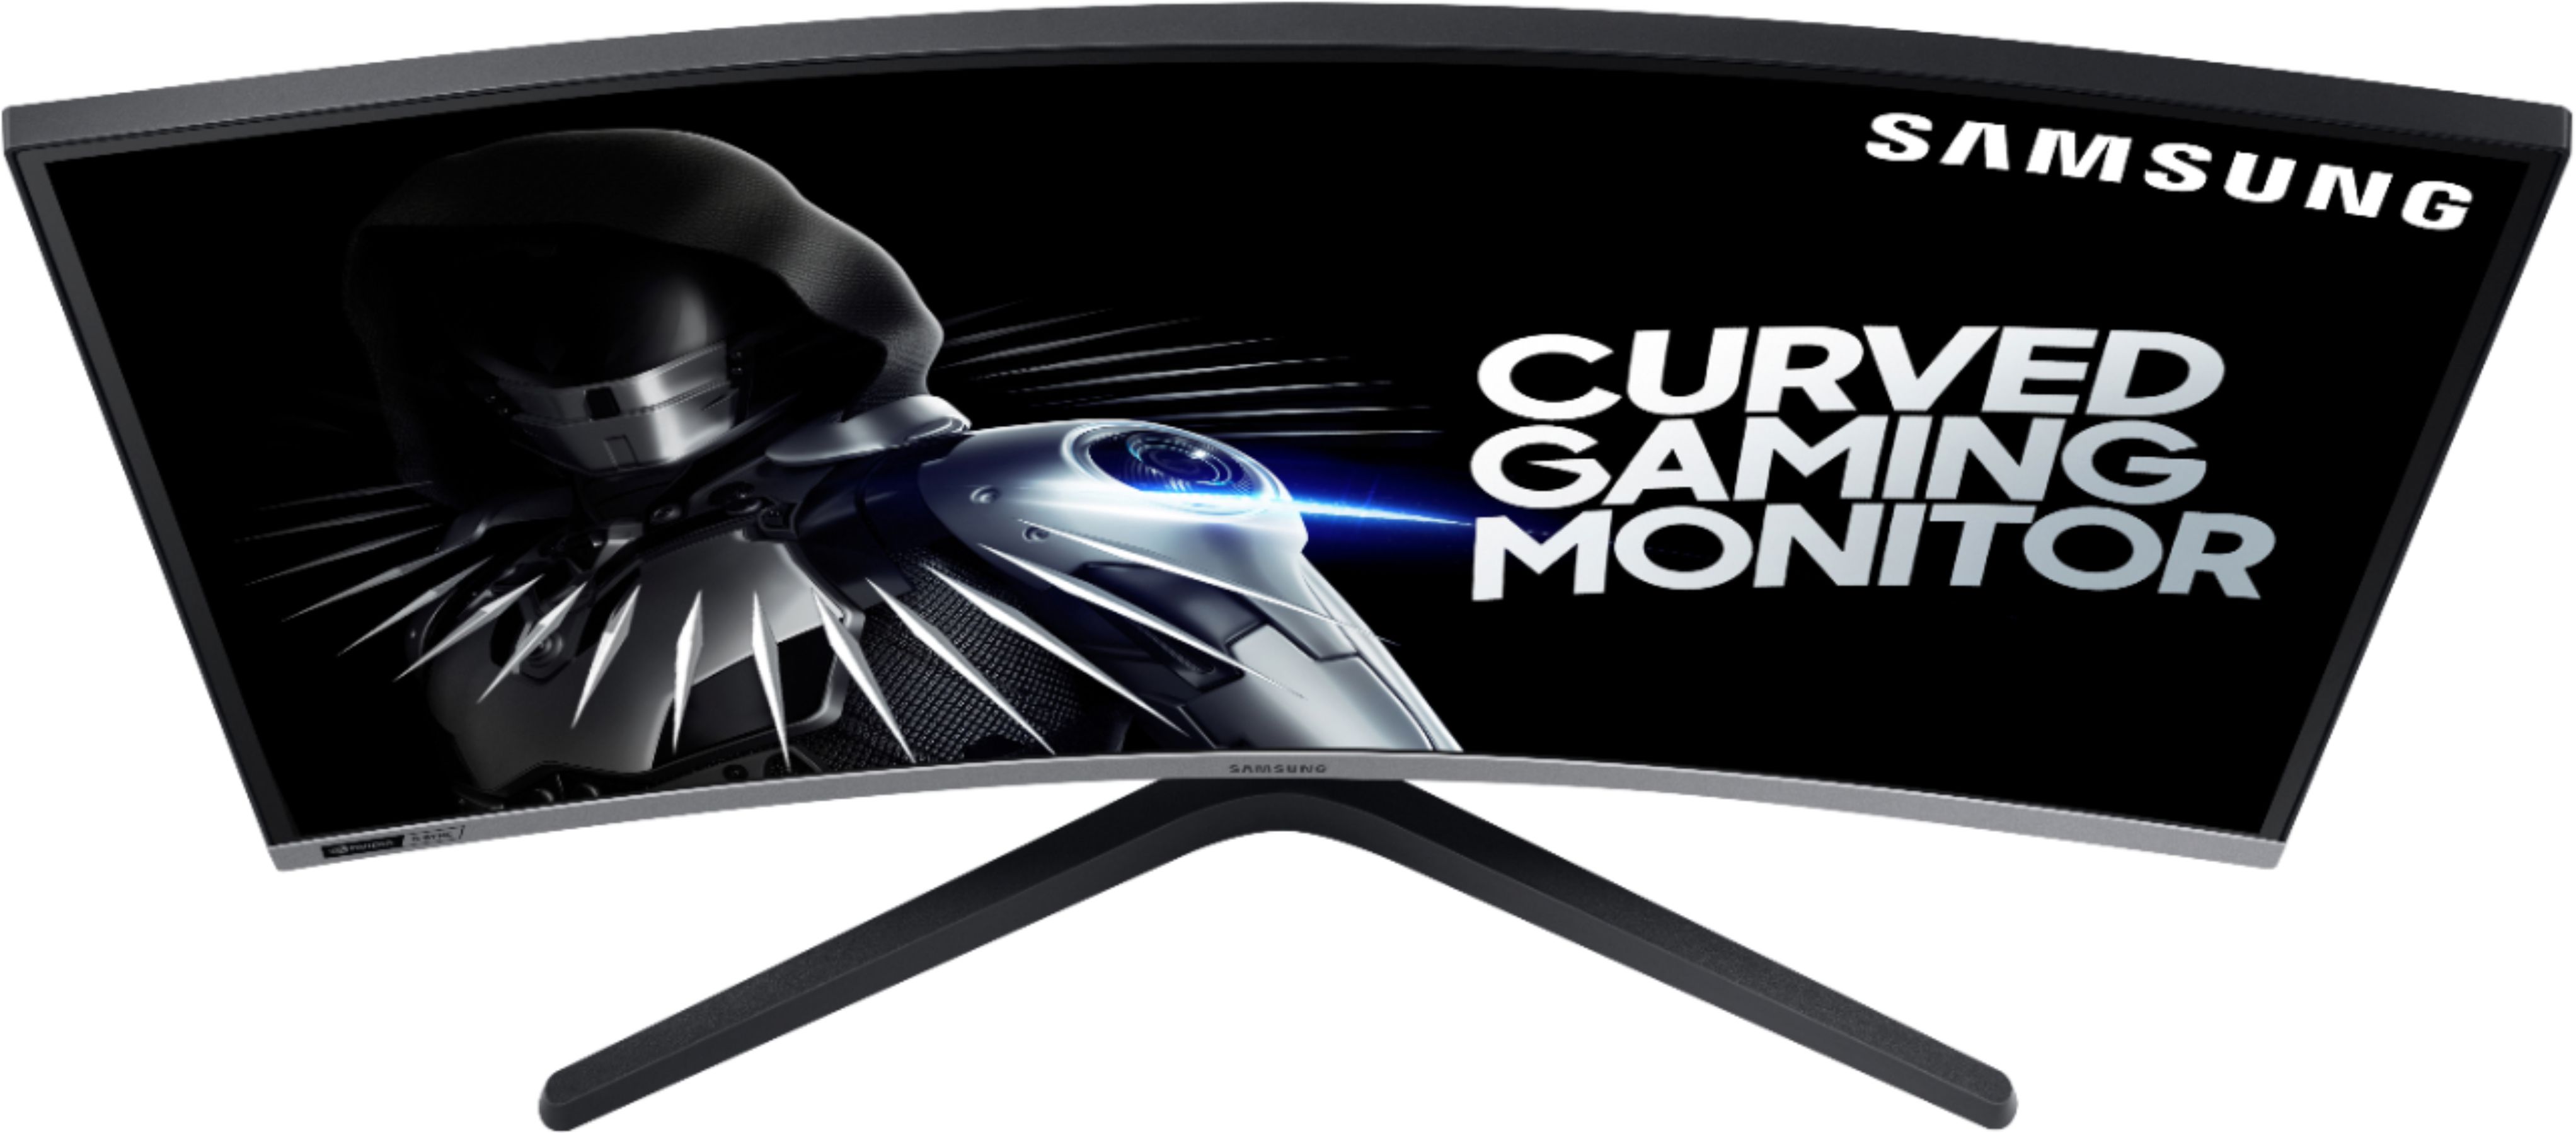 Best Buy: Samsung 27” Odyssey Gaming CRG5 Series LED Curved 240Hz FHD  Monitor with G-SYNC Compatibility Dark Blue/Gray LC27RG50FQNXZA